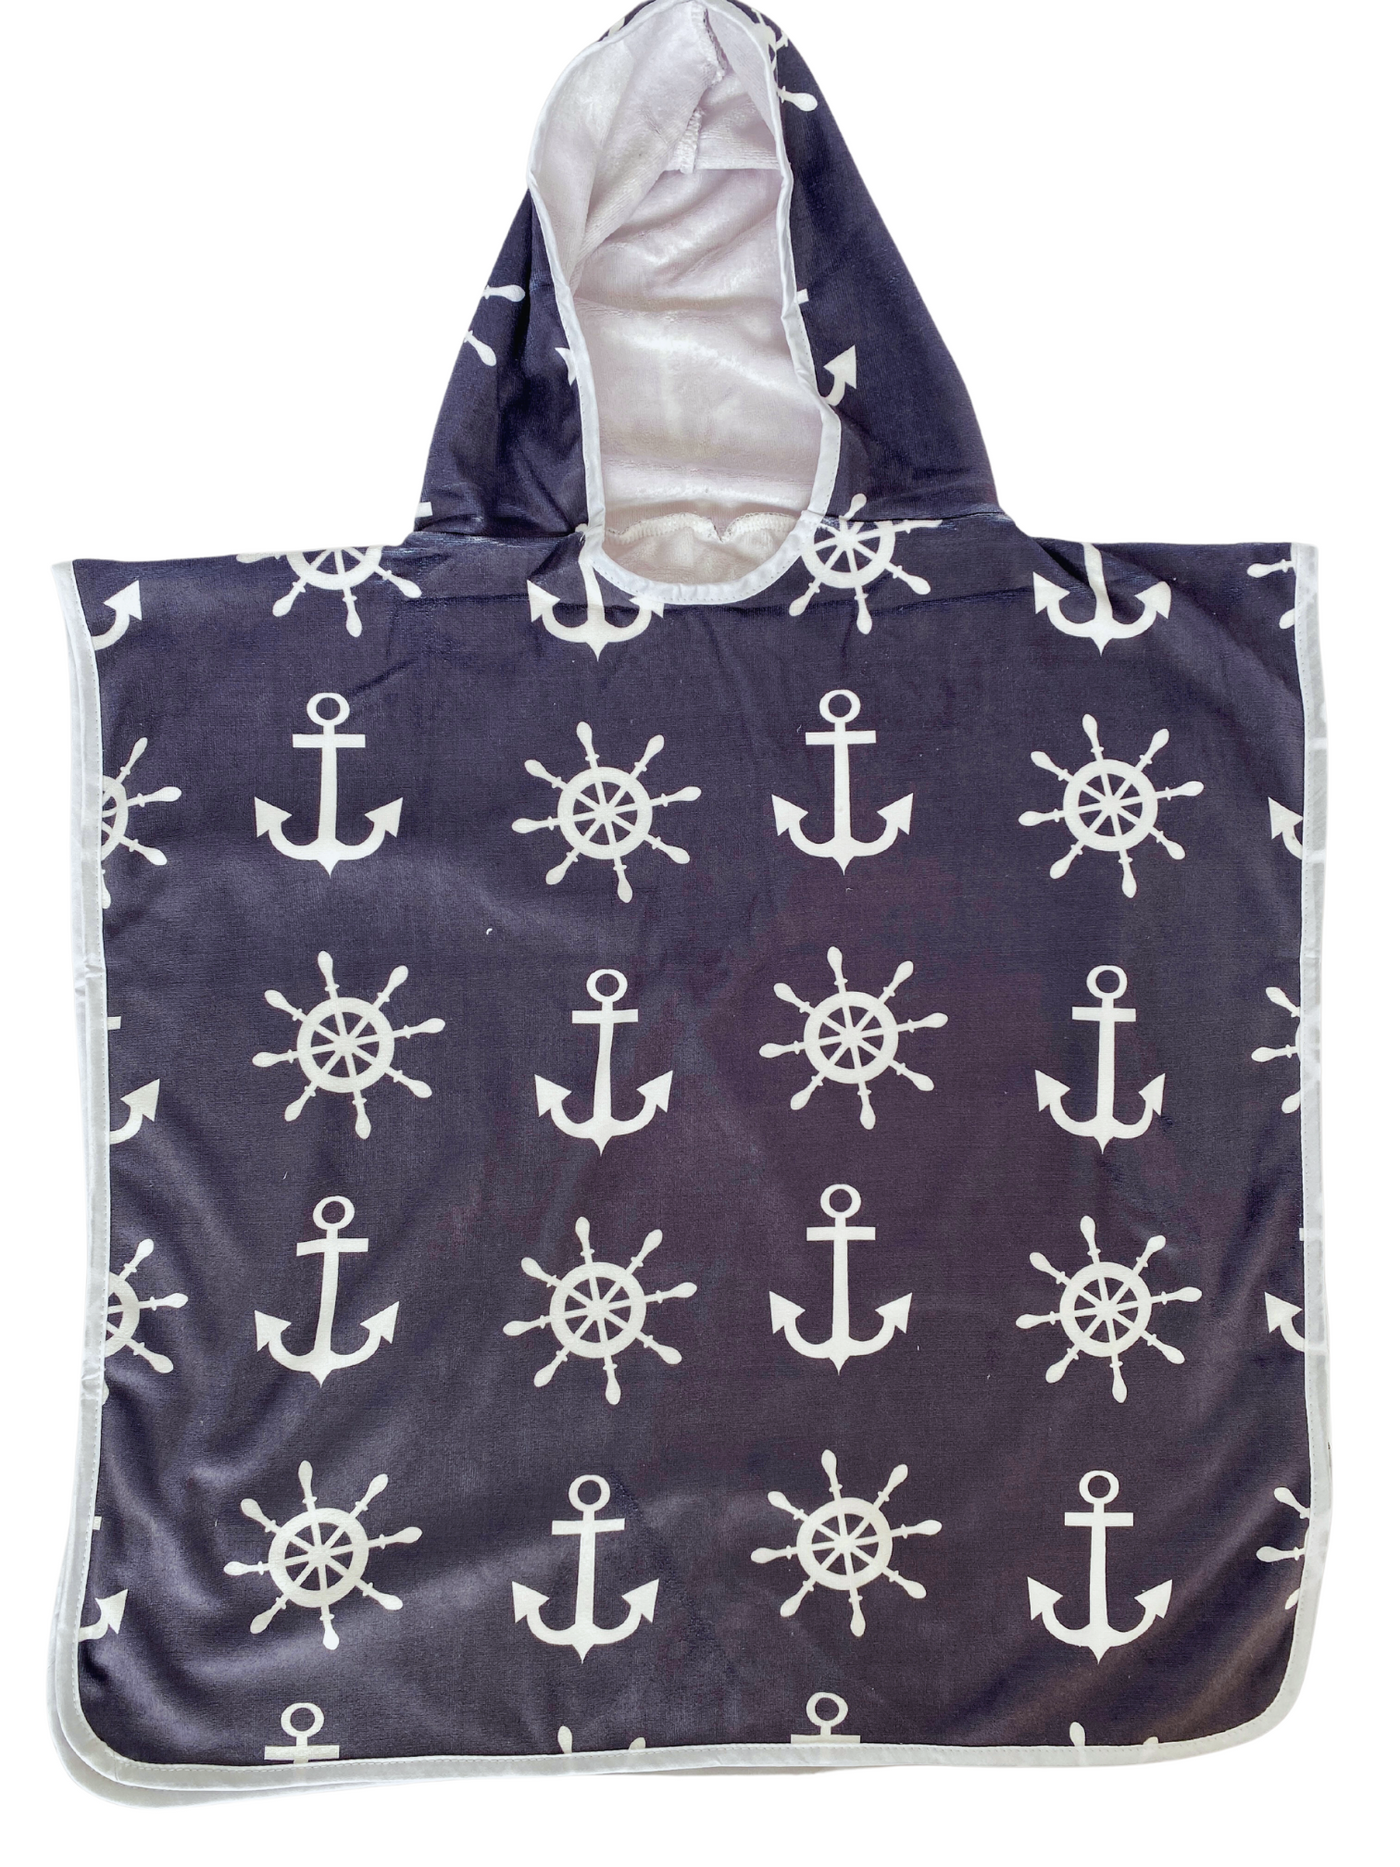 Hooded Kid Towel (18 months to 5 years): Boat Anchors